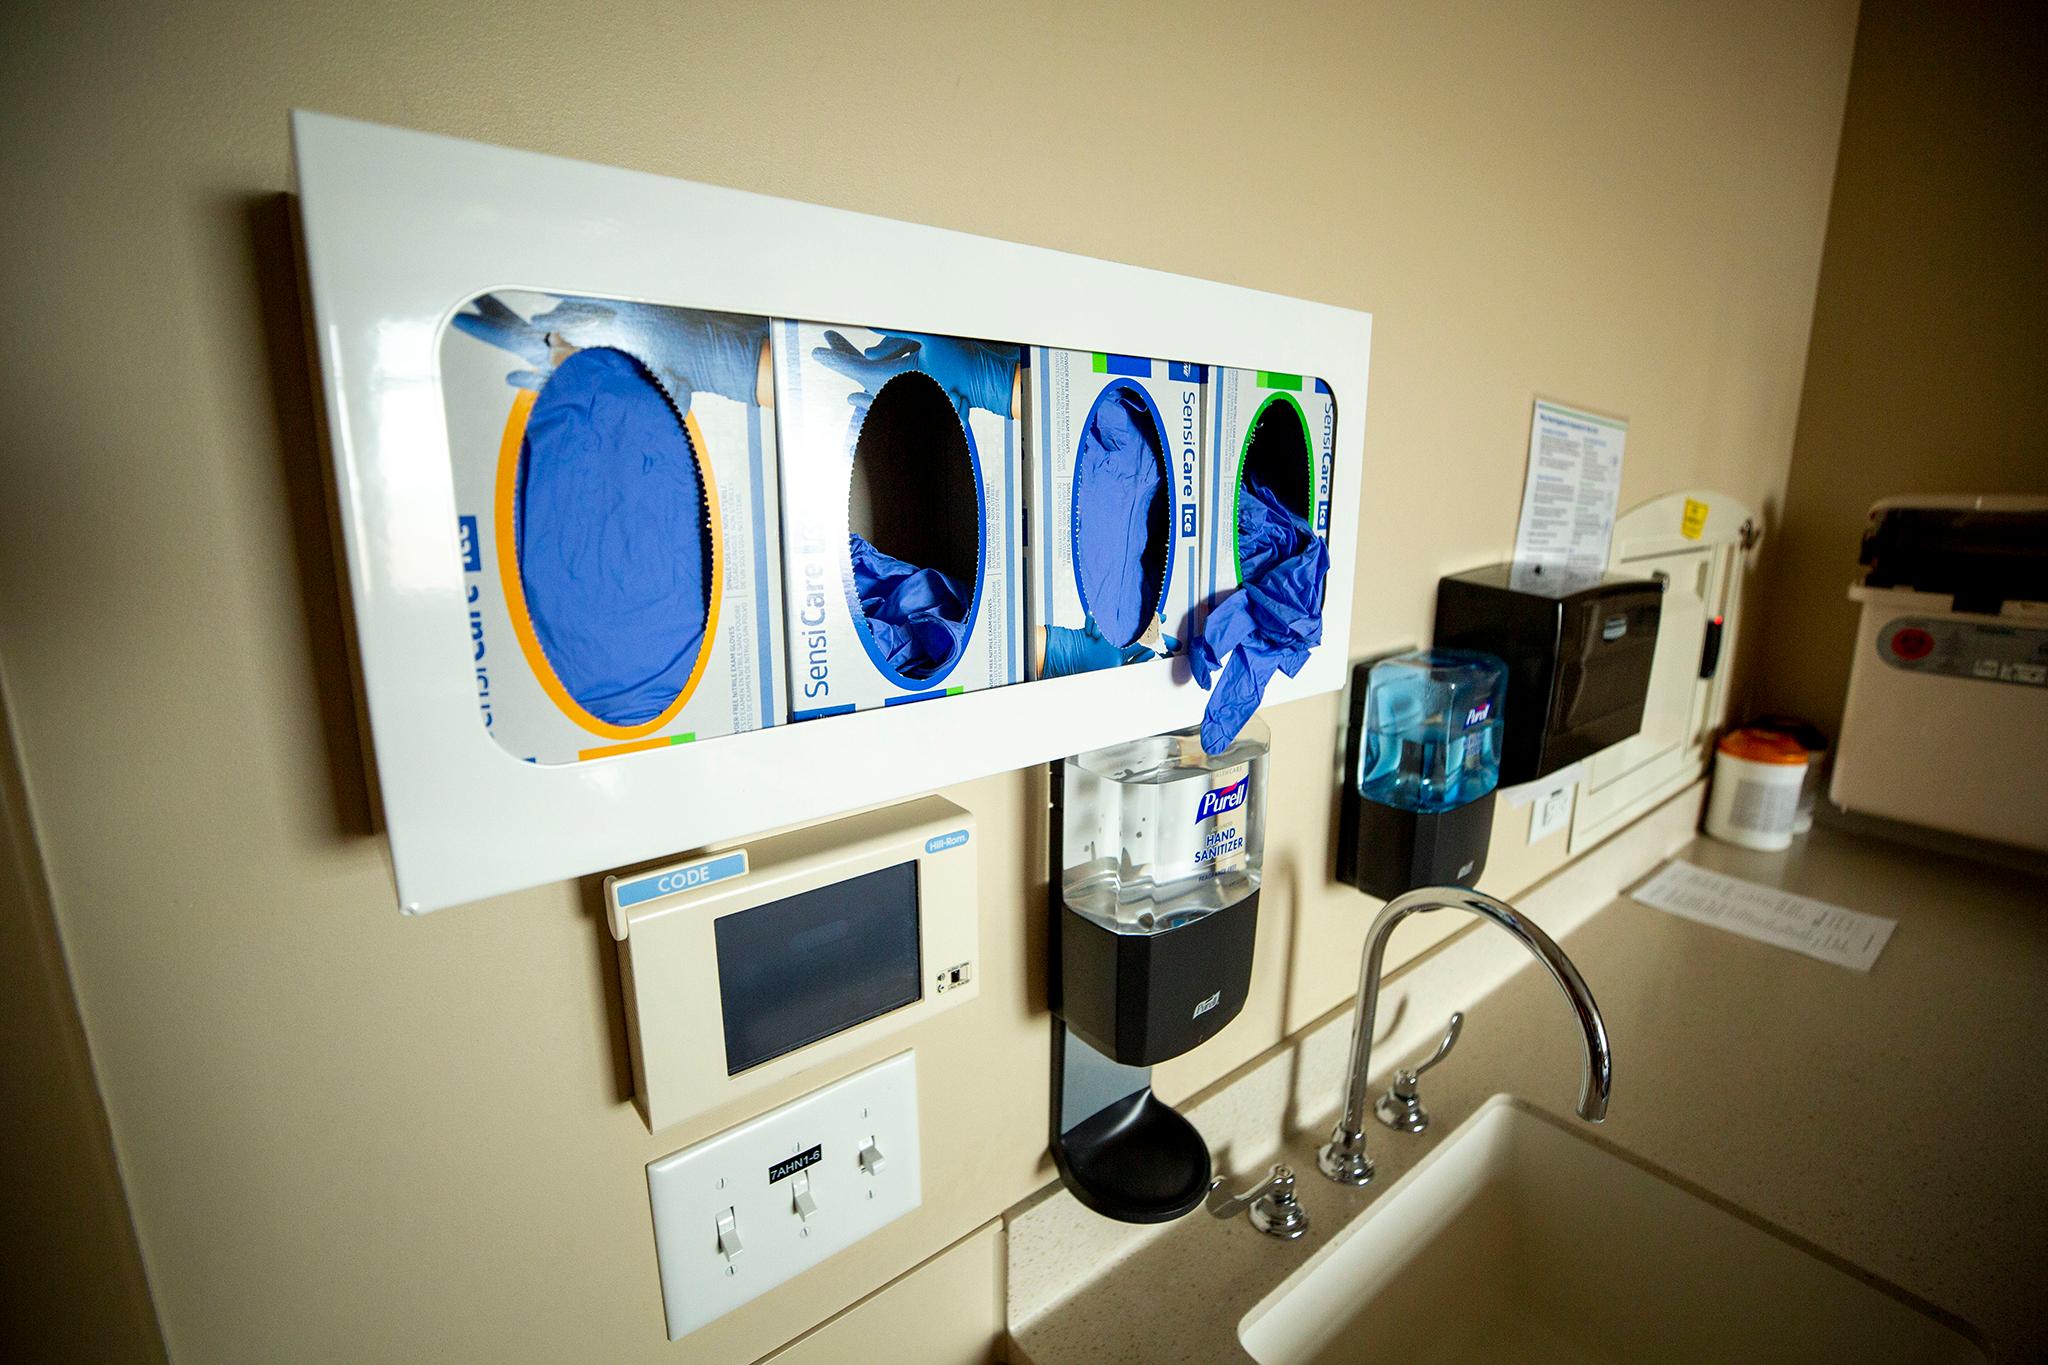 Glove boxes on the wall inside a room at St. Joseph Hospital, March 10, 2020.